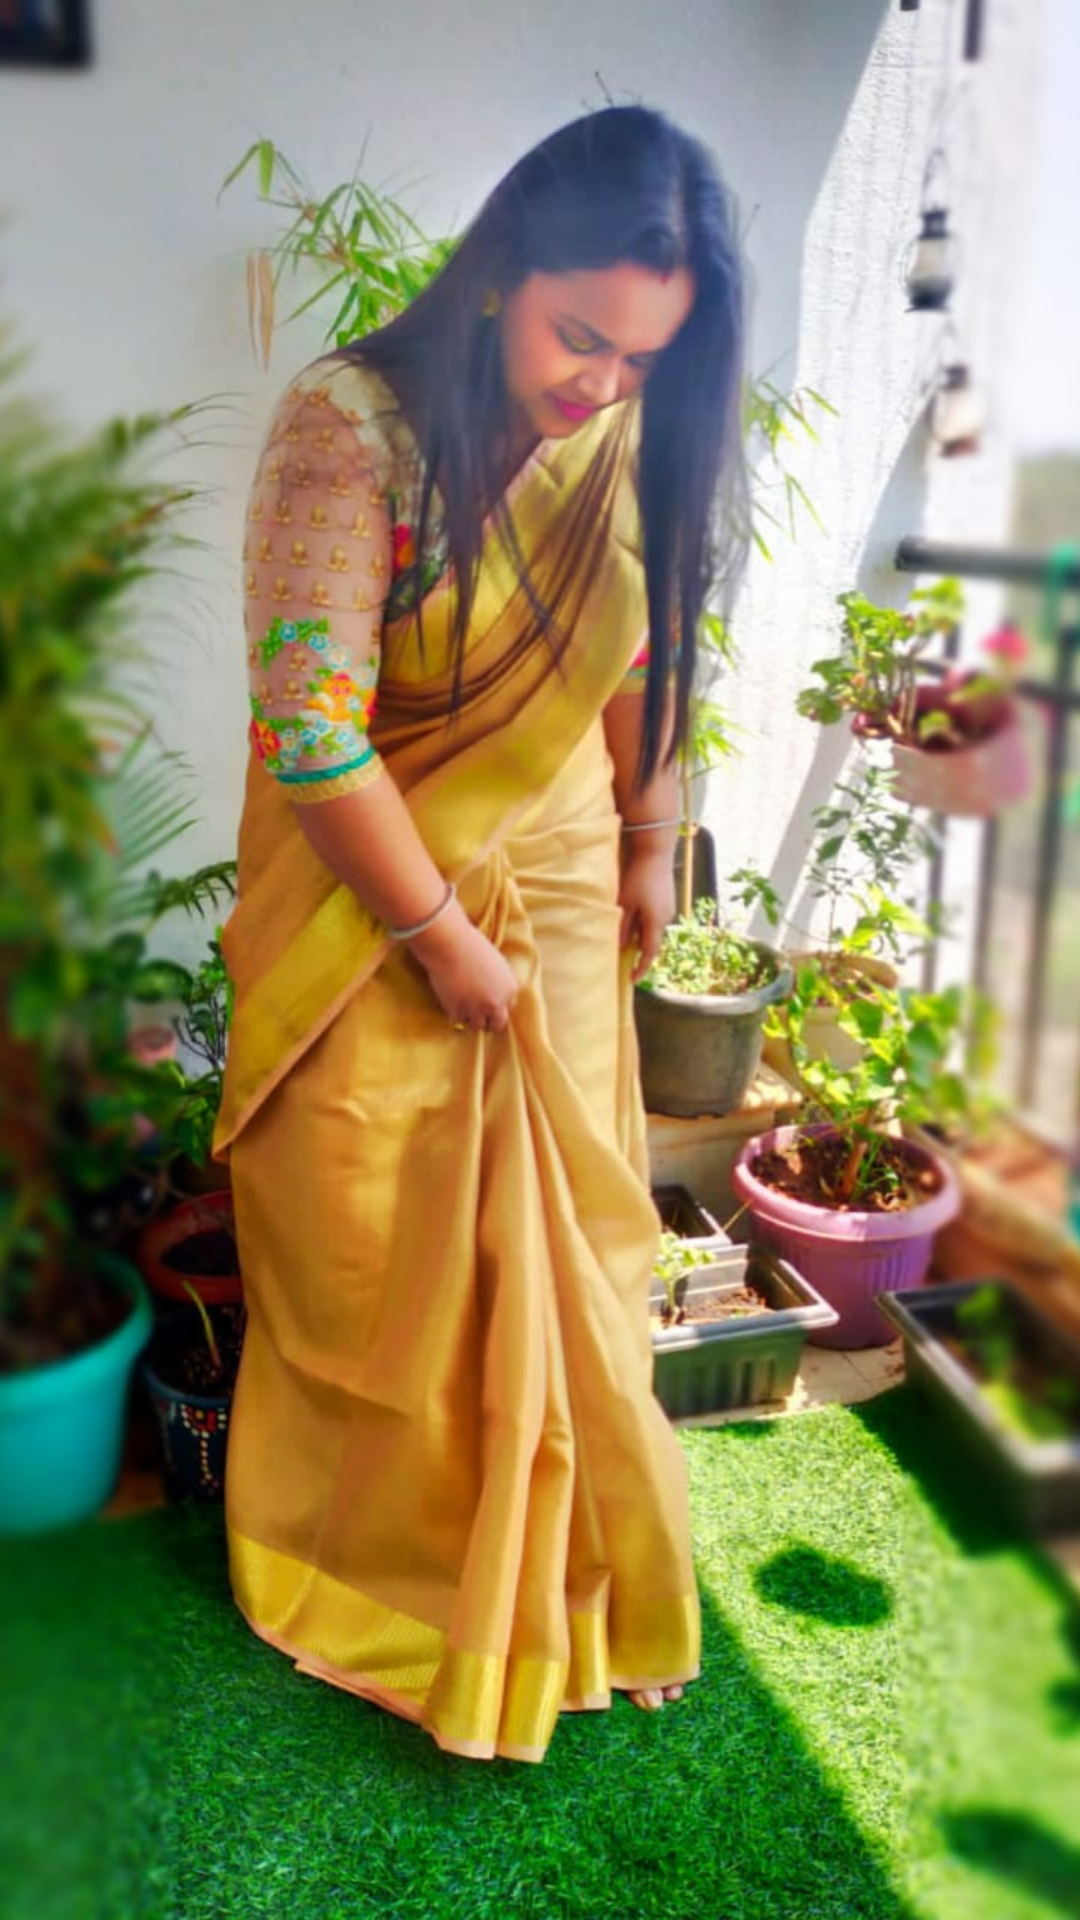 Hand Dyed Pure Tissue Linen Golden Yellow Color Saree With Running Blouse-Indiehaat